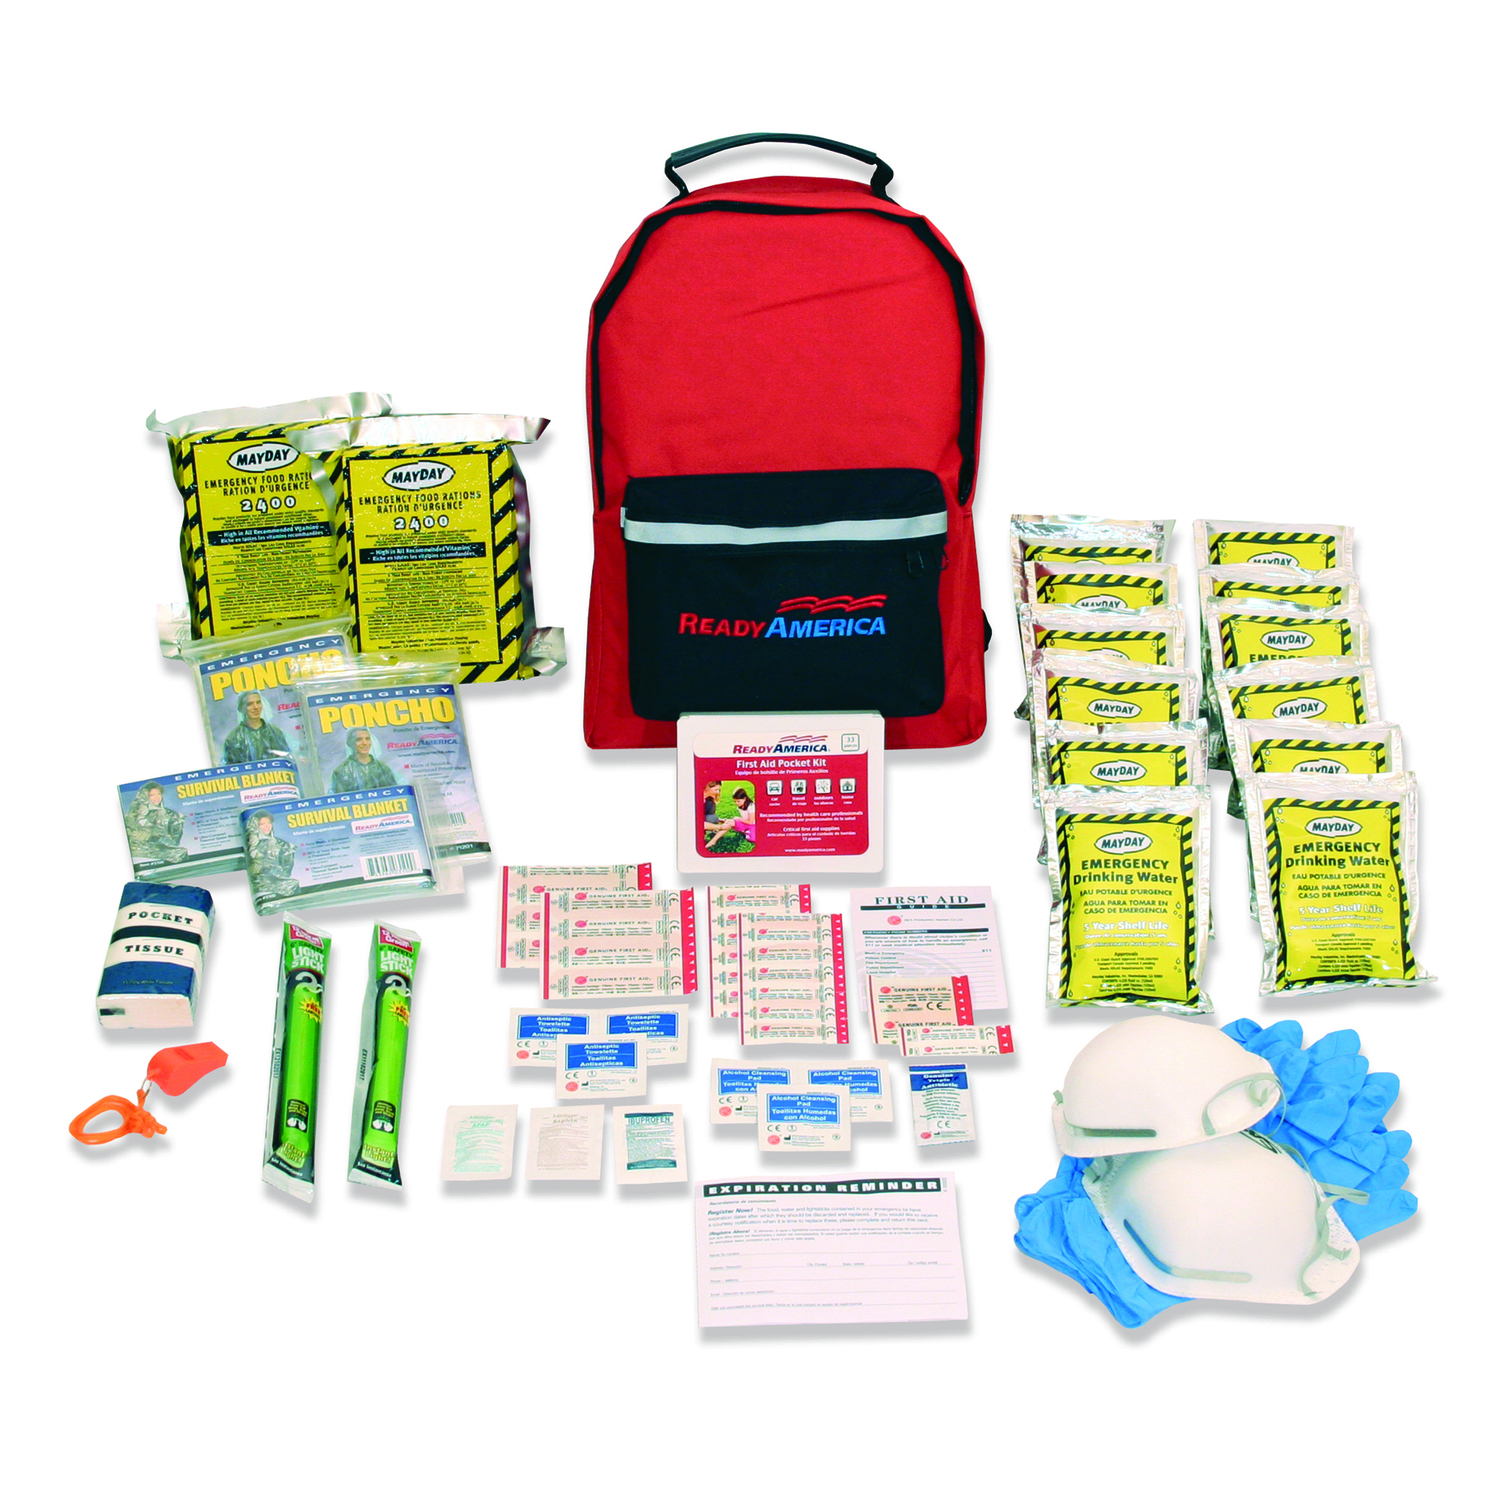 Photo 1 of Ready America Ready America 12.5 x 9 x 5 in. Multicolored Emergency Kit 7.75 lb 33 pc